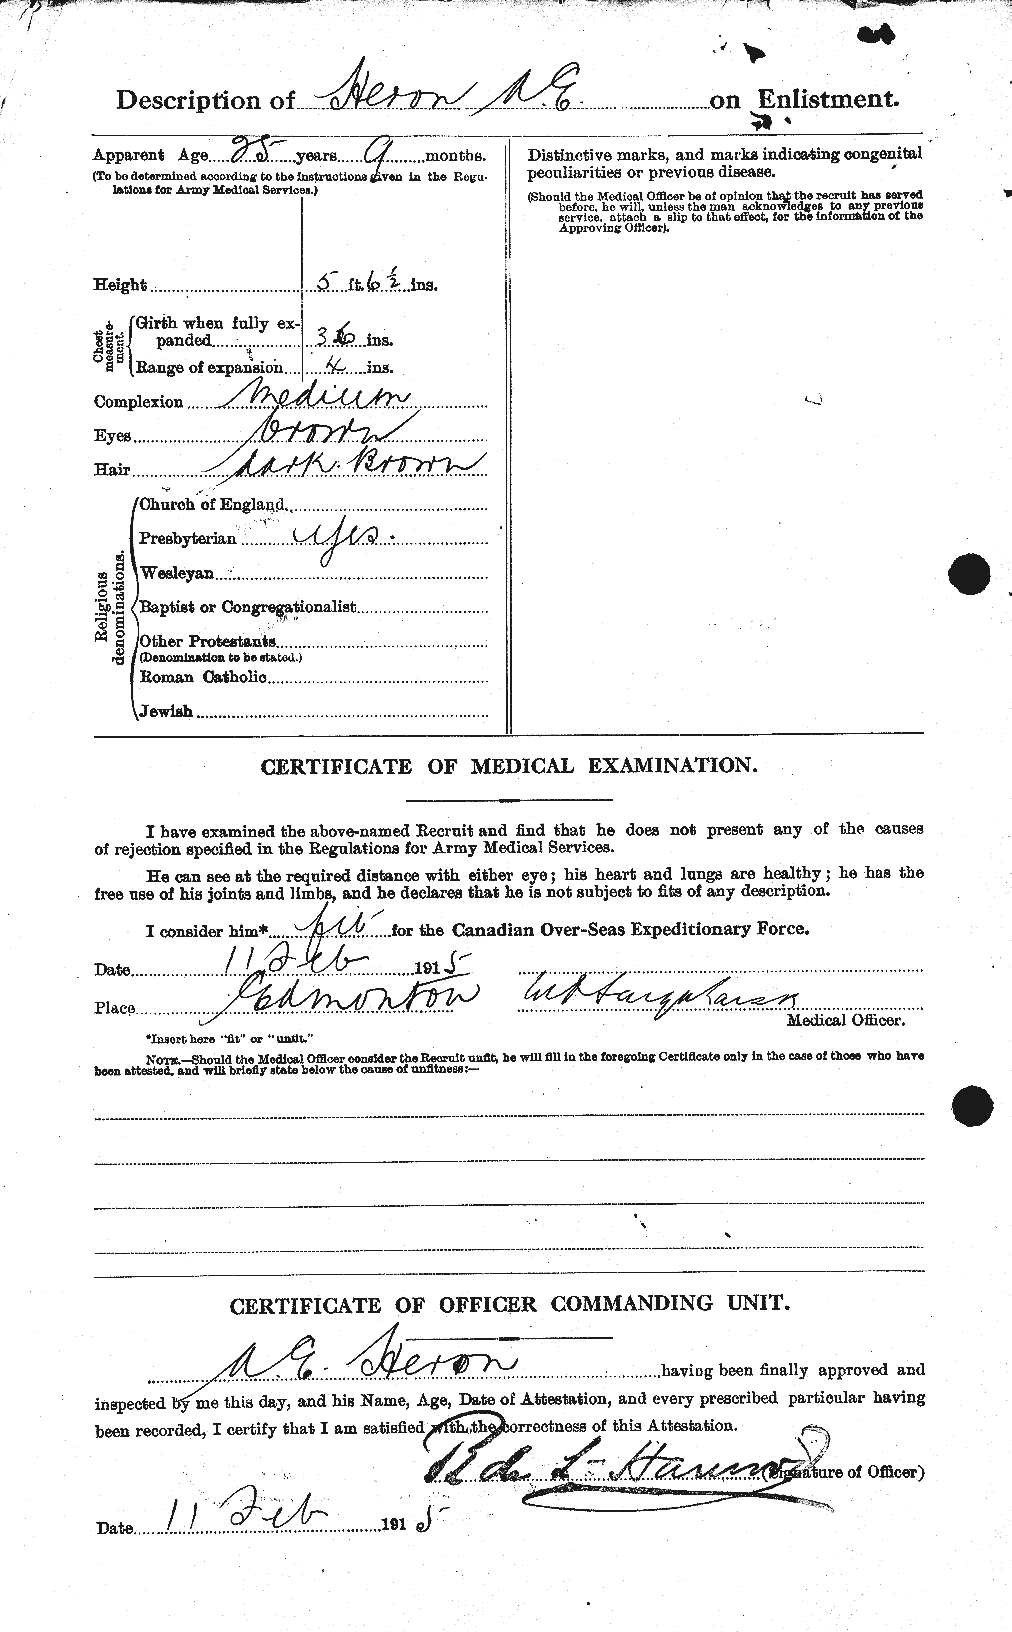 Personnel Records of the First World War - CEF 388435b